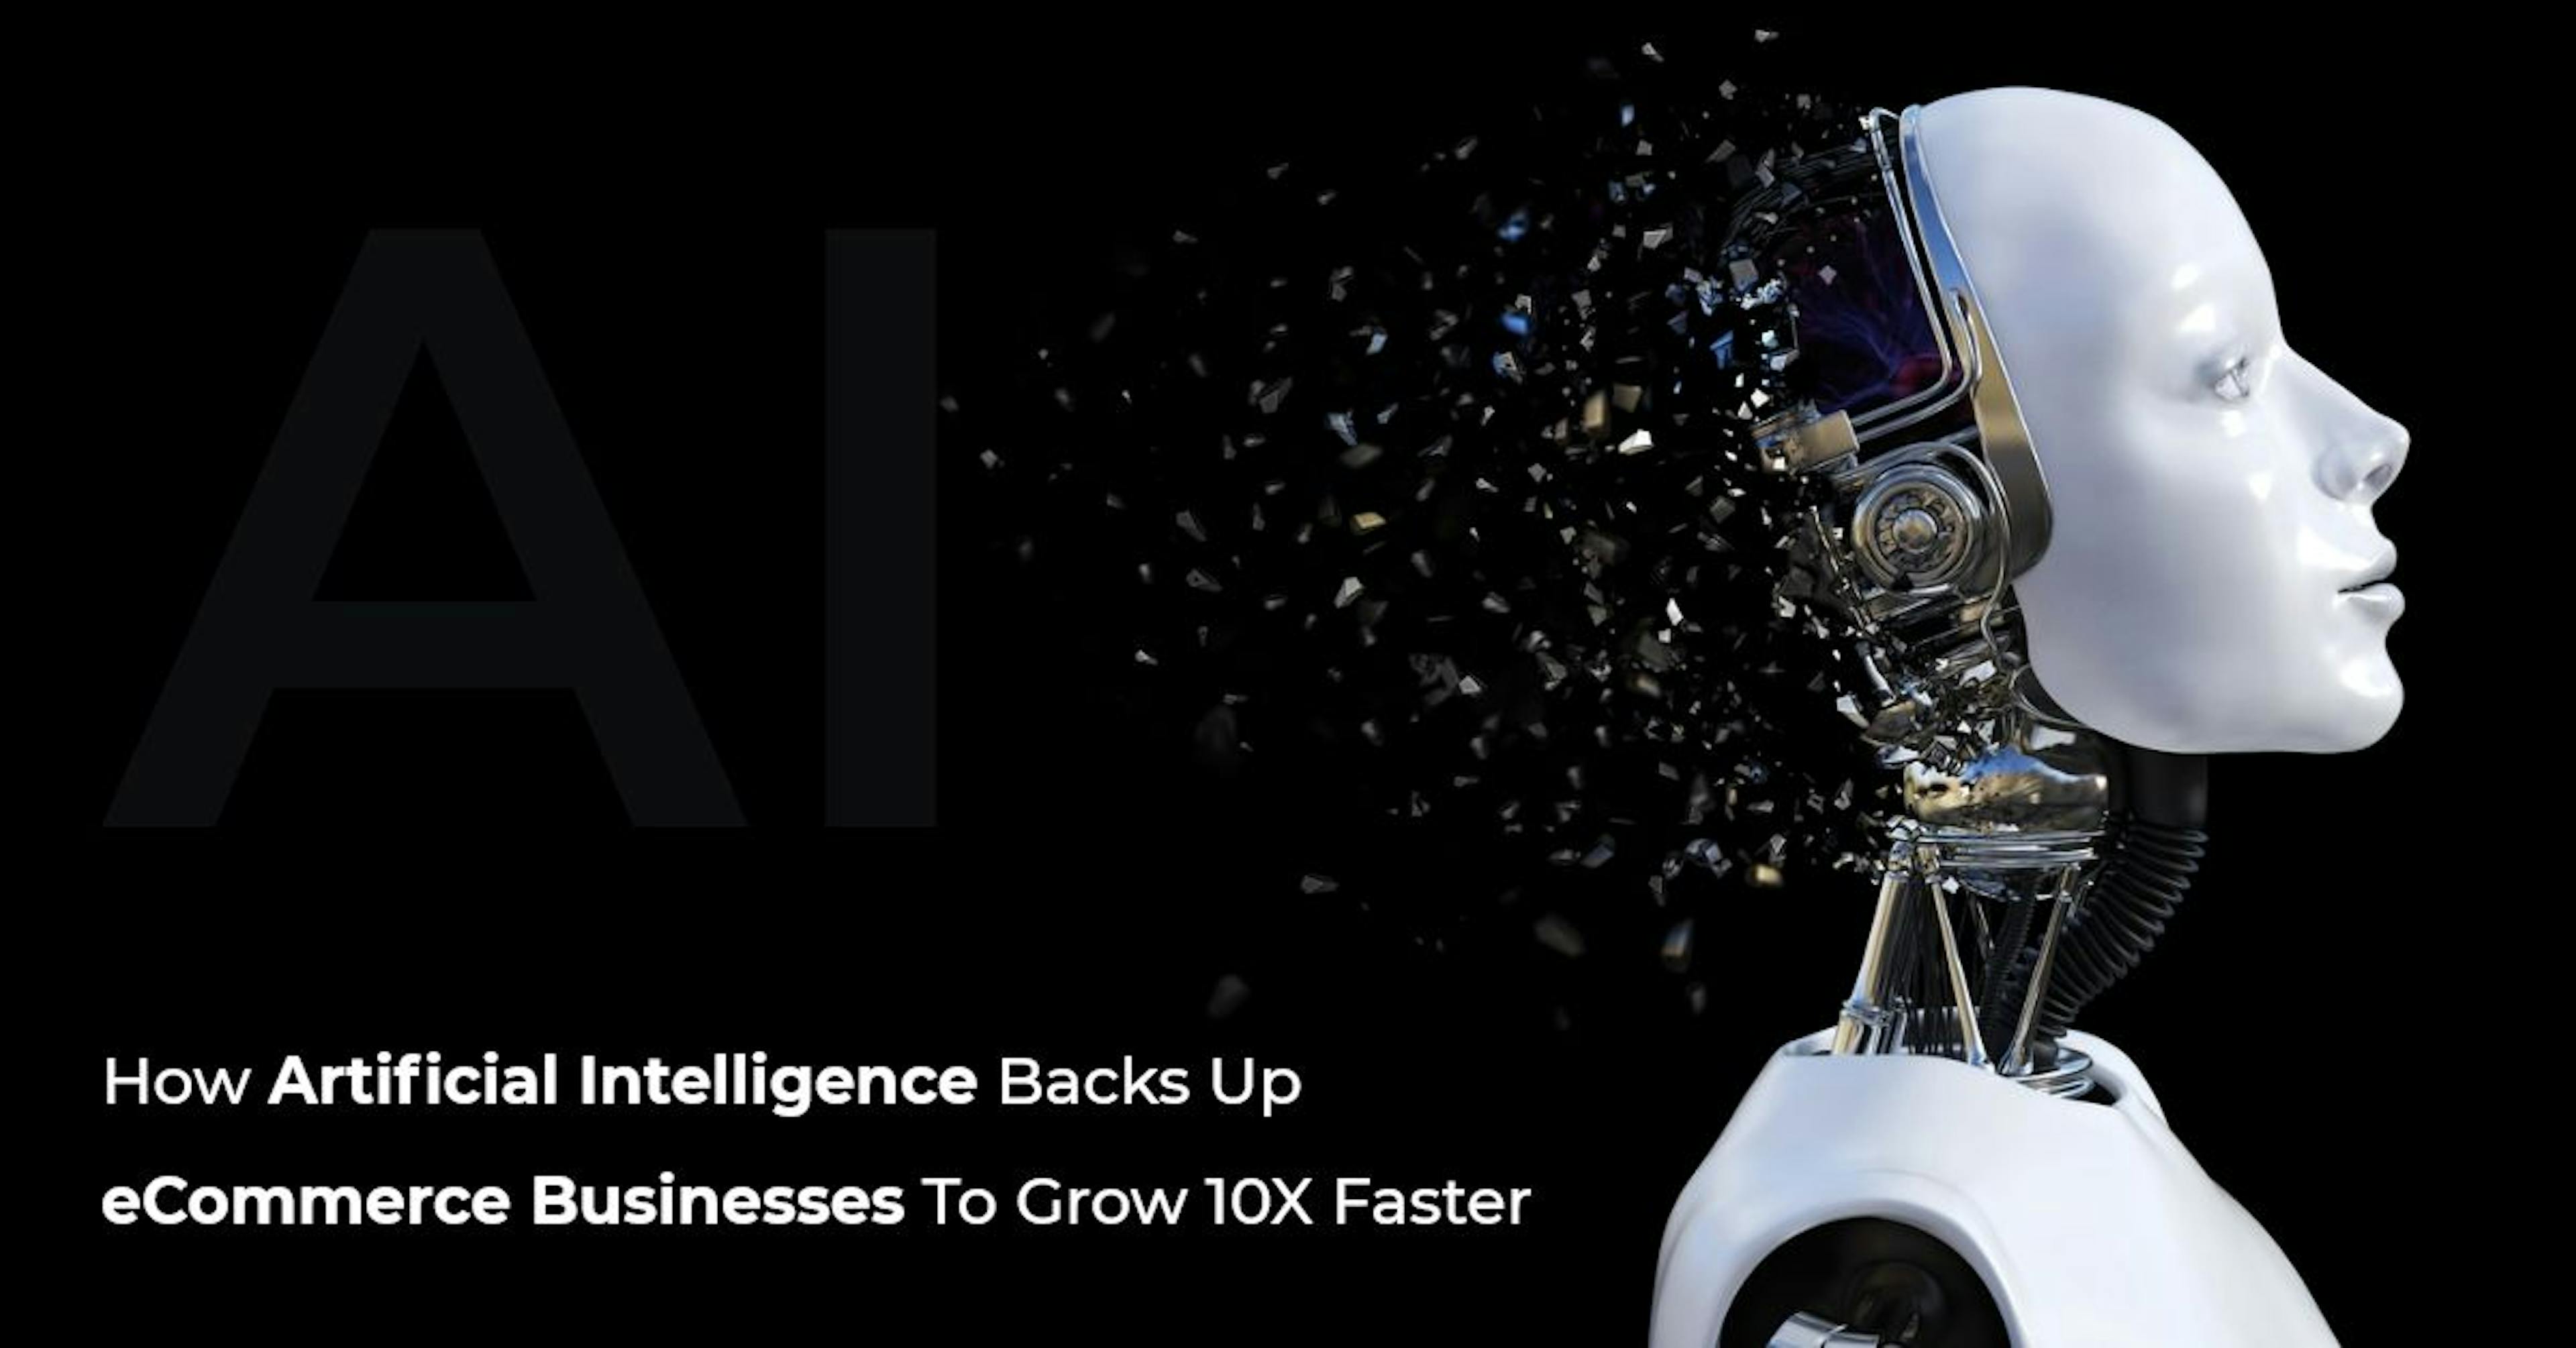 featured image - How Artificial Intelligence Backs Up eCommerce Businesses to Grow 10X Faster